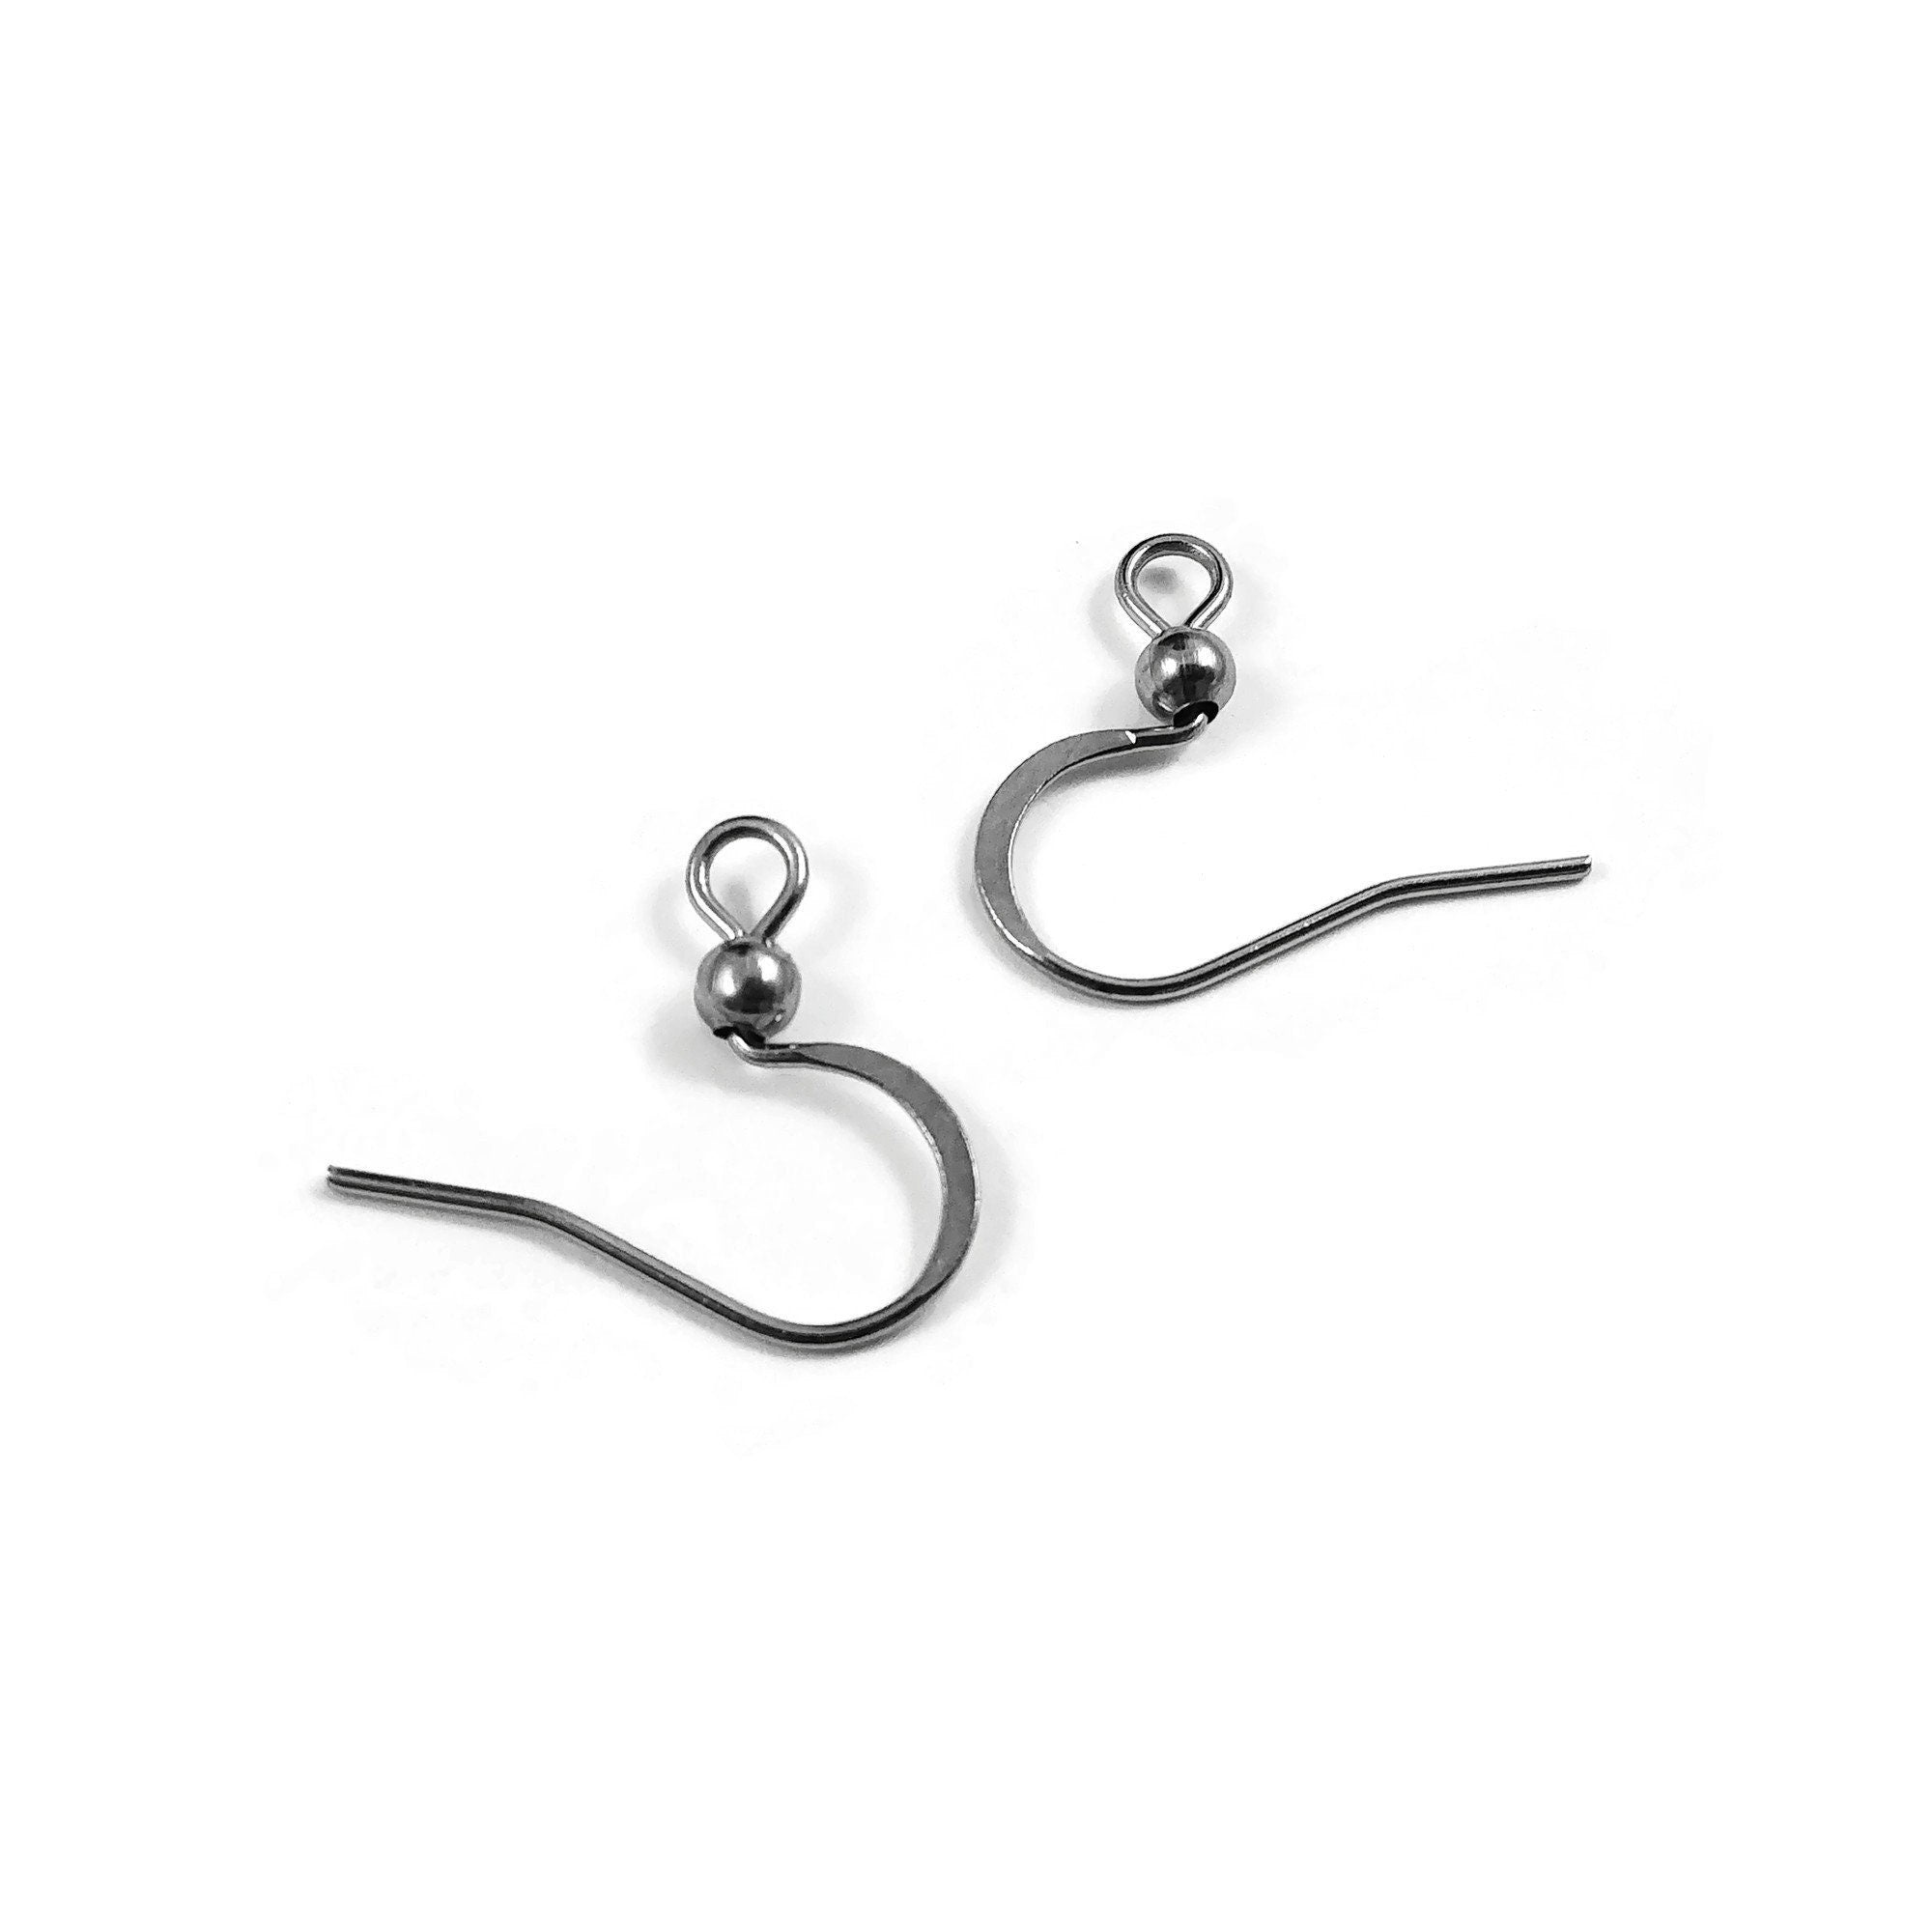 Earring Hooks Stainless Steel Hypoallergenic Wires For Jewelry Making  Accessory